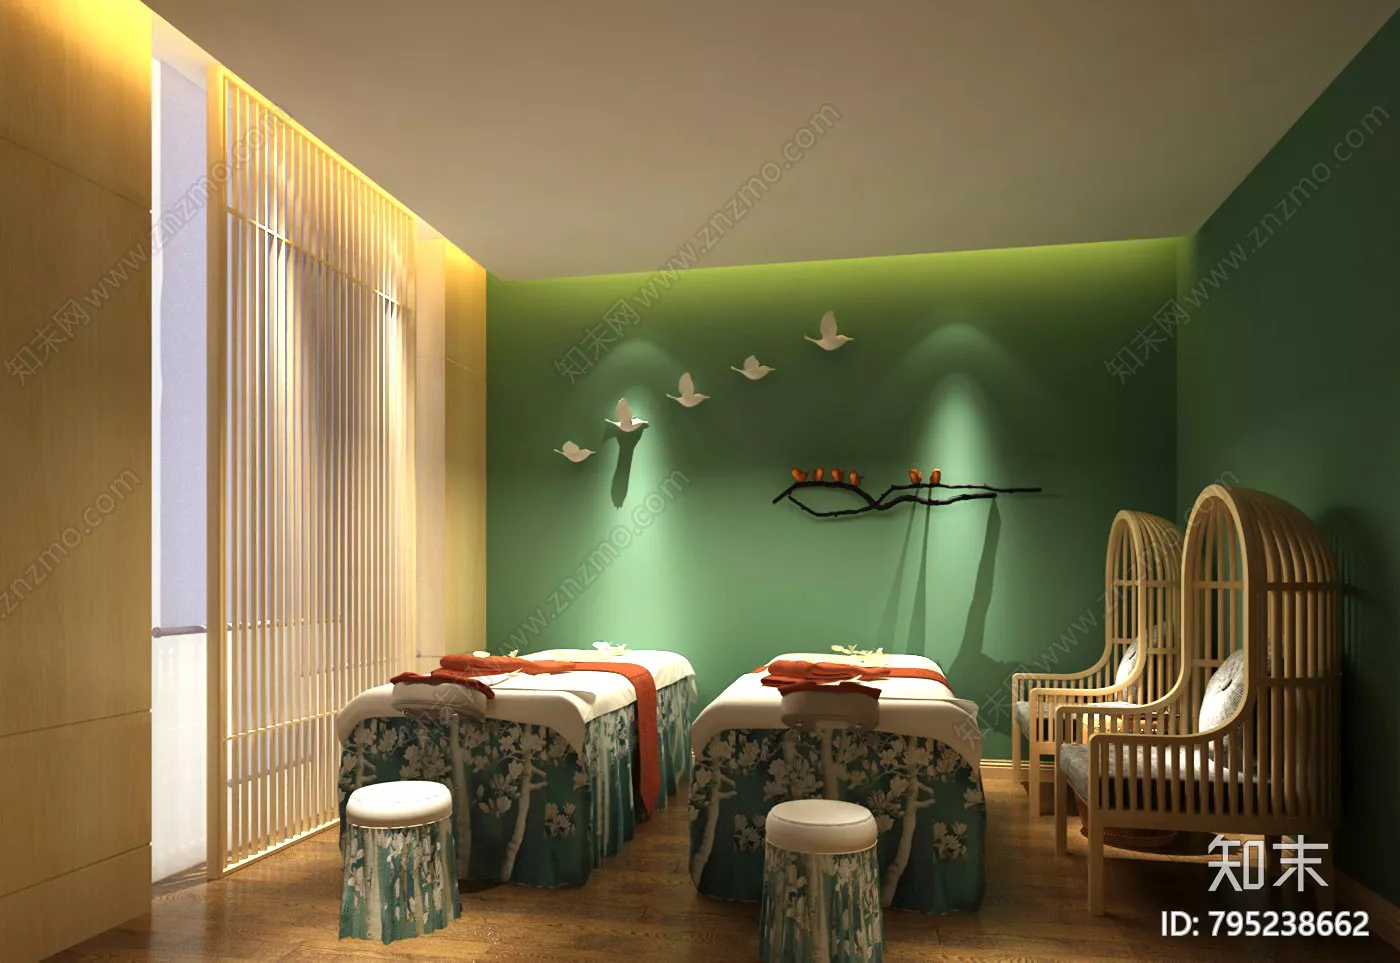 MODERN SPA AND BEAUTY - SKETCHUP 3D SCENE - VRAY OR ENSCAPE - ID13895